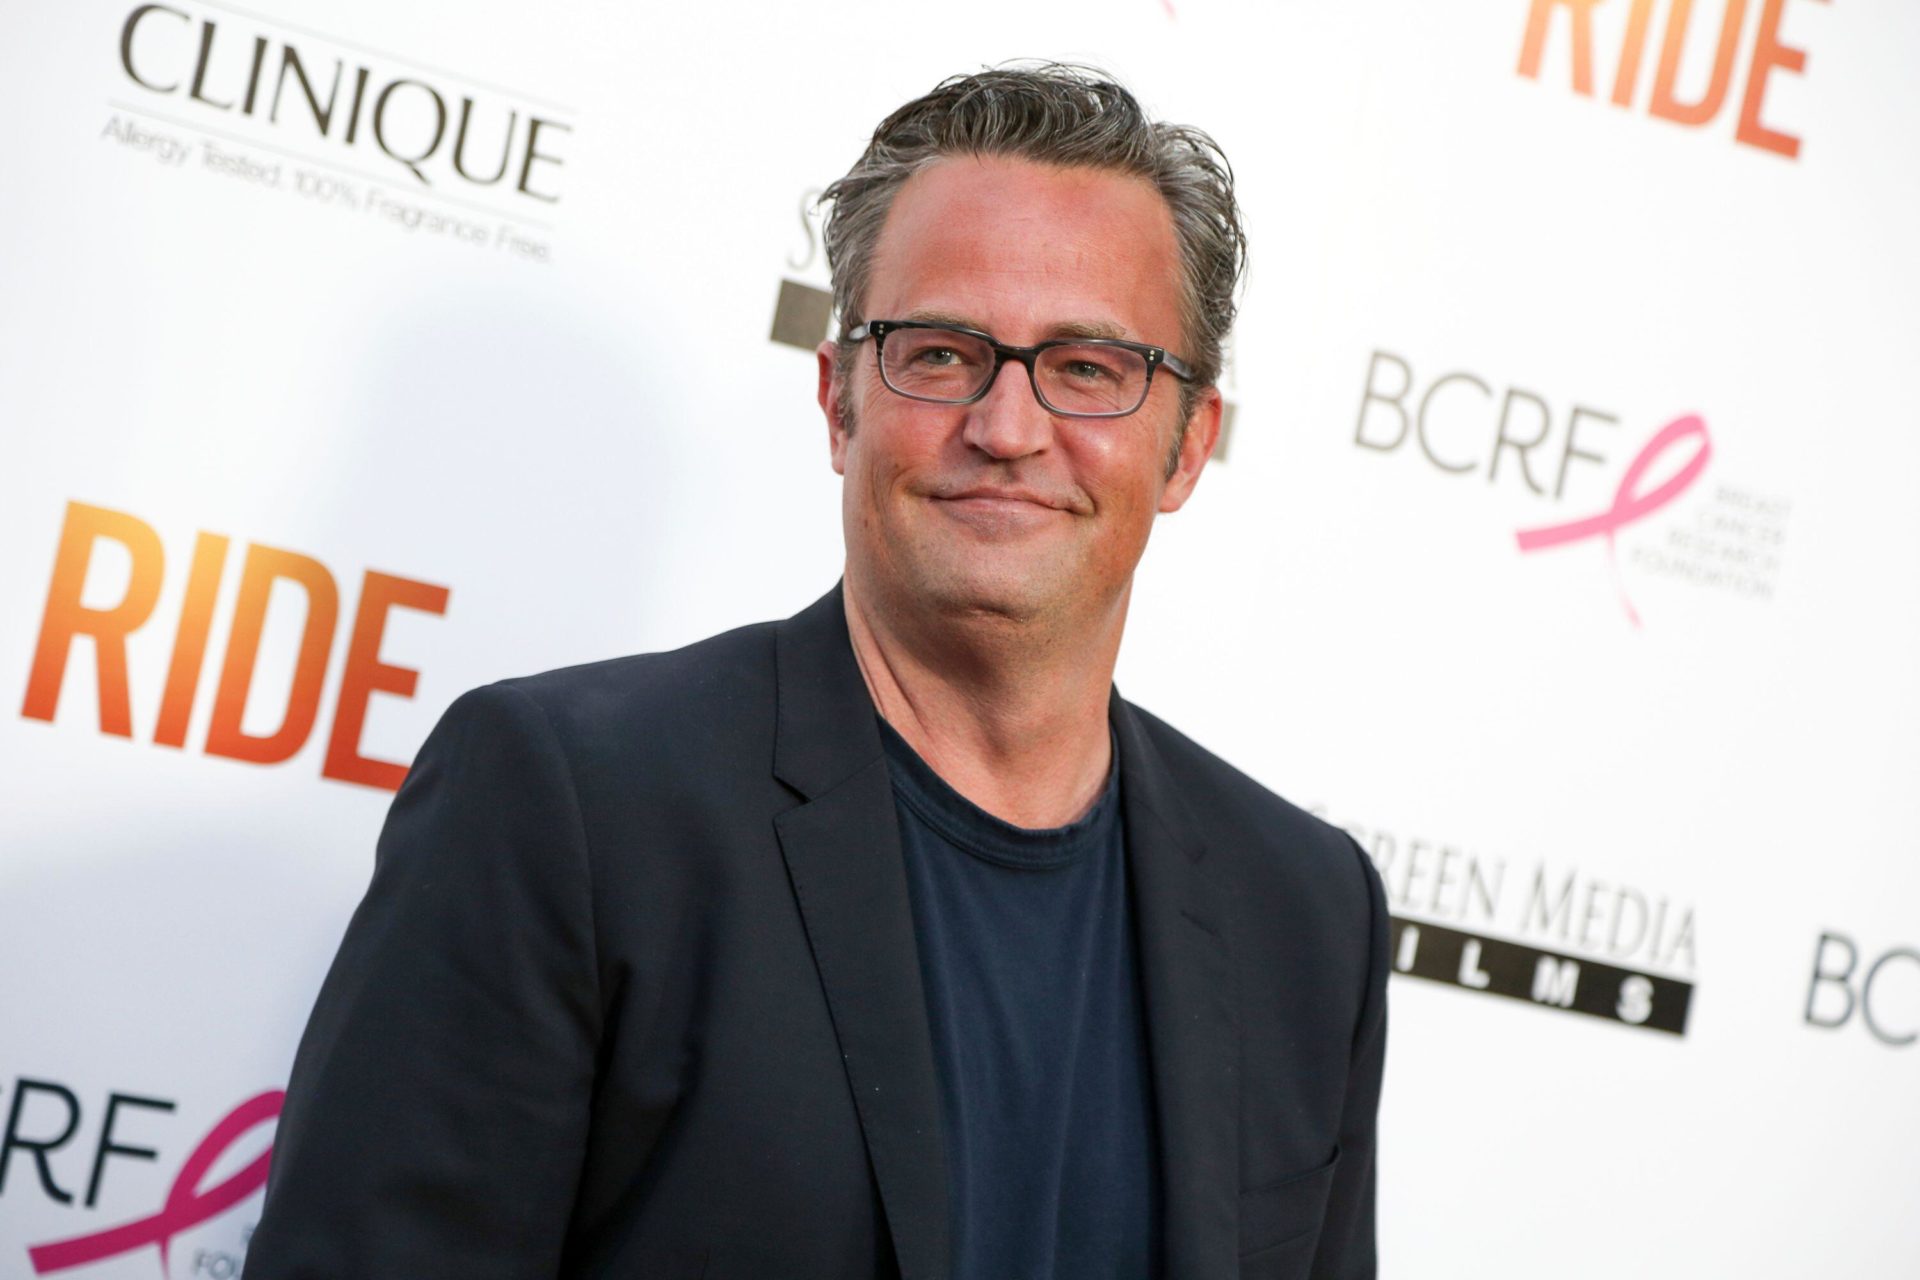 2MWM3T3 FILE - In this April 28, 2015, file photo, Matthew Perry arrives at the LA Premiere of "Ride" in Los Angeles. The former "Friends" star appears with Katie Holmes, who reprises her role as Jackie Kennedy in "The Kennedys After Camelot,? which premieres on the Reelz channel on April 2. (Photo by Rich Fury/Invision/AP, File)